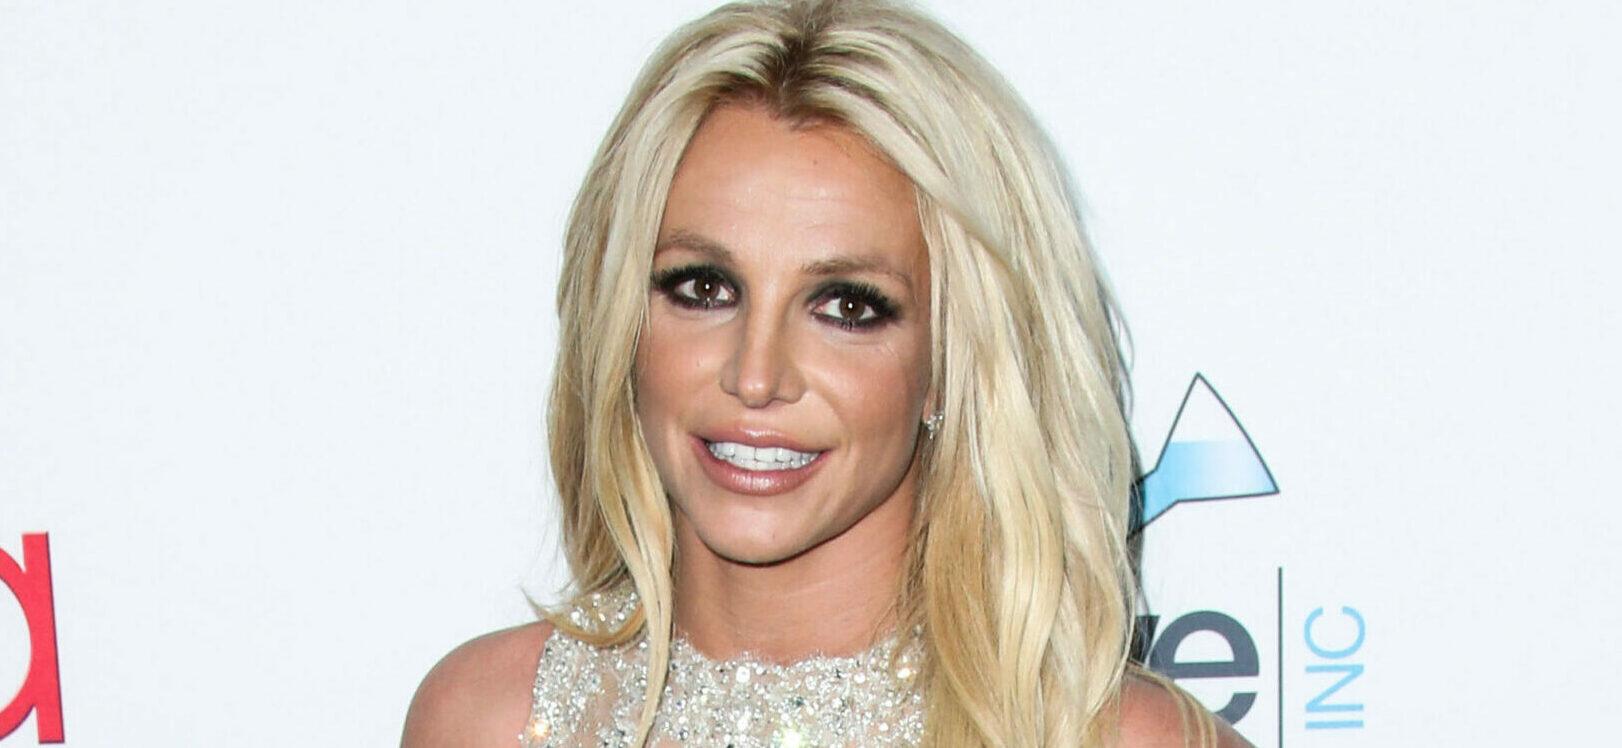 Britney Spears Describes What ‘Freedom’ Looks Like Following Her Conservatorship